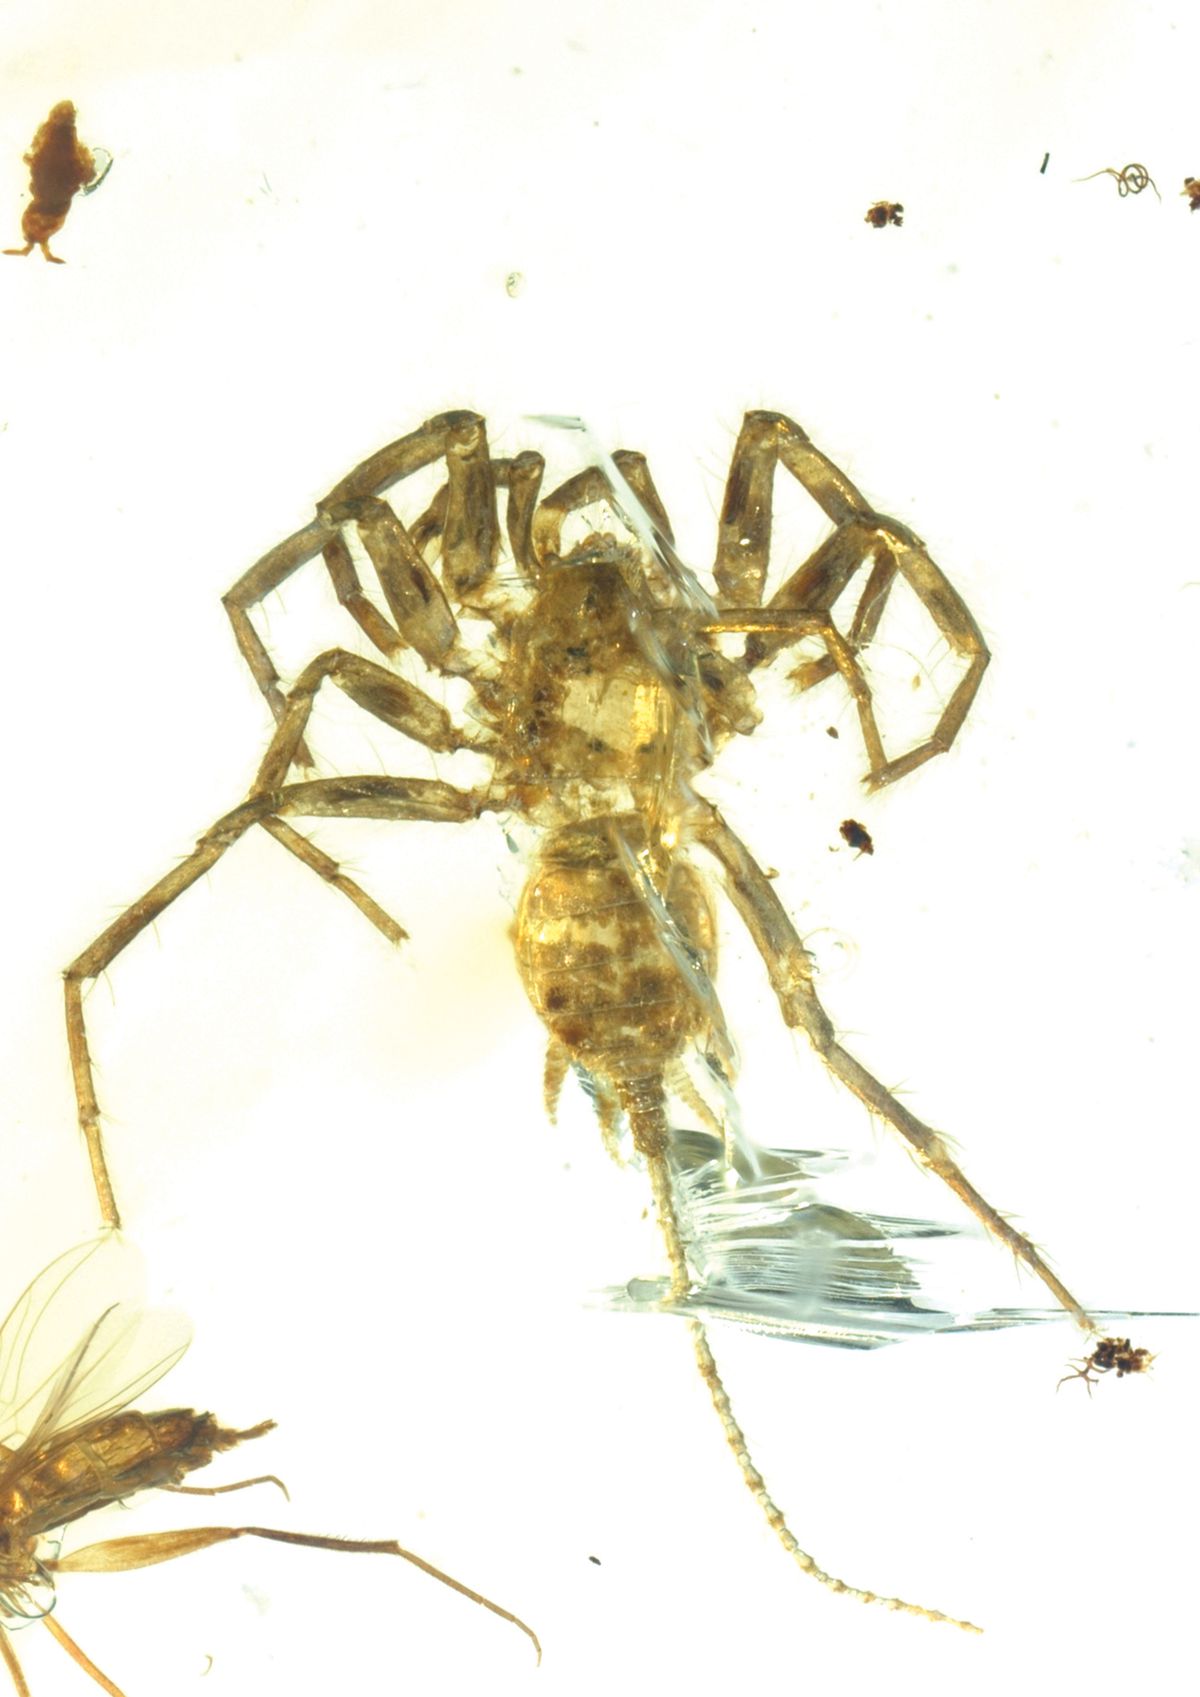 It is possible to make spiders creepier, ancient fossils in amber ...